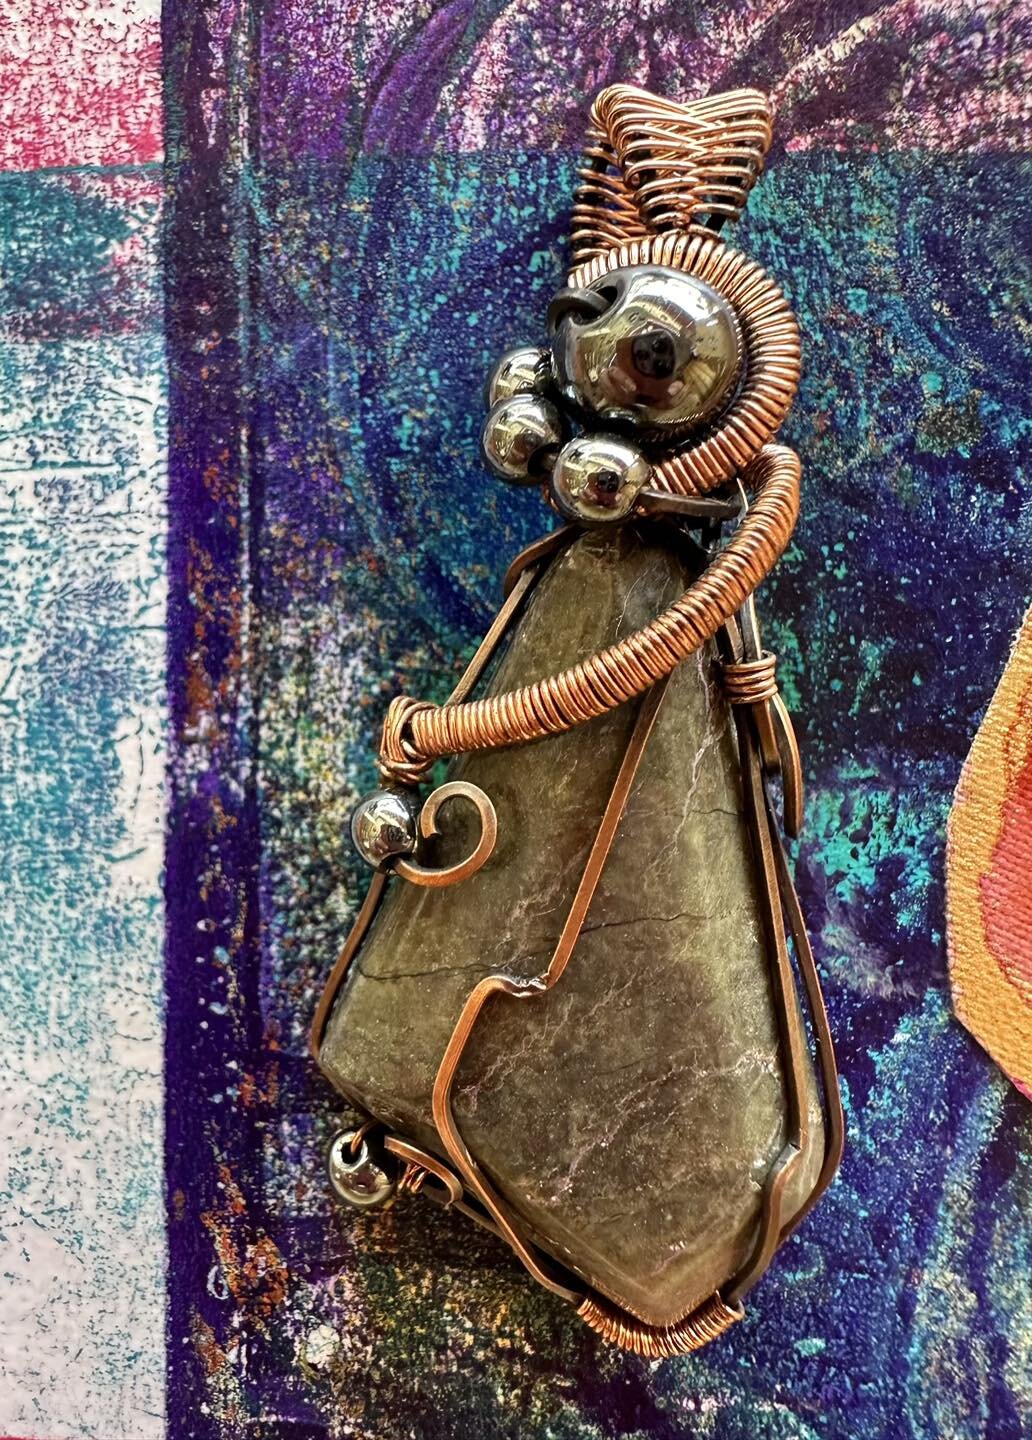 Alisha Dugan's creates bold designs with her wire wrapping skills that make for the perfect statement pieces. Stop by Garden City Arts to see her newest pieces and during our gallery hours from 1-5PM, Tuesday-Saturday or when you are attending one of